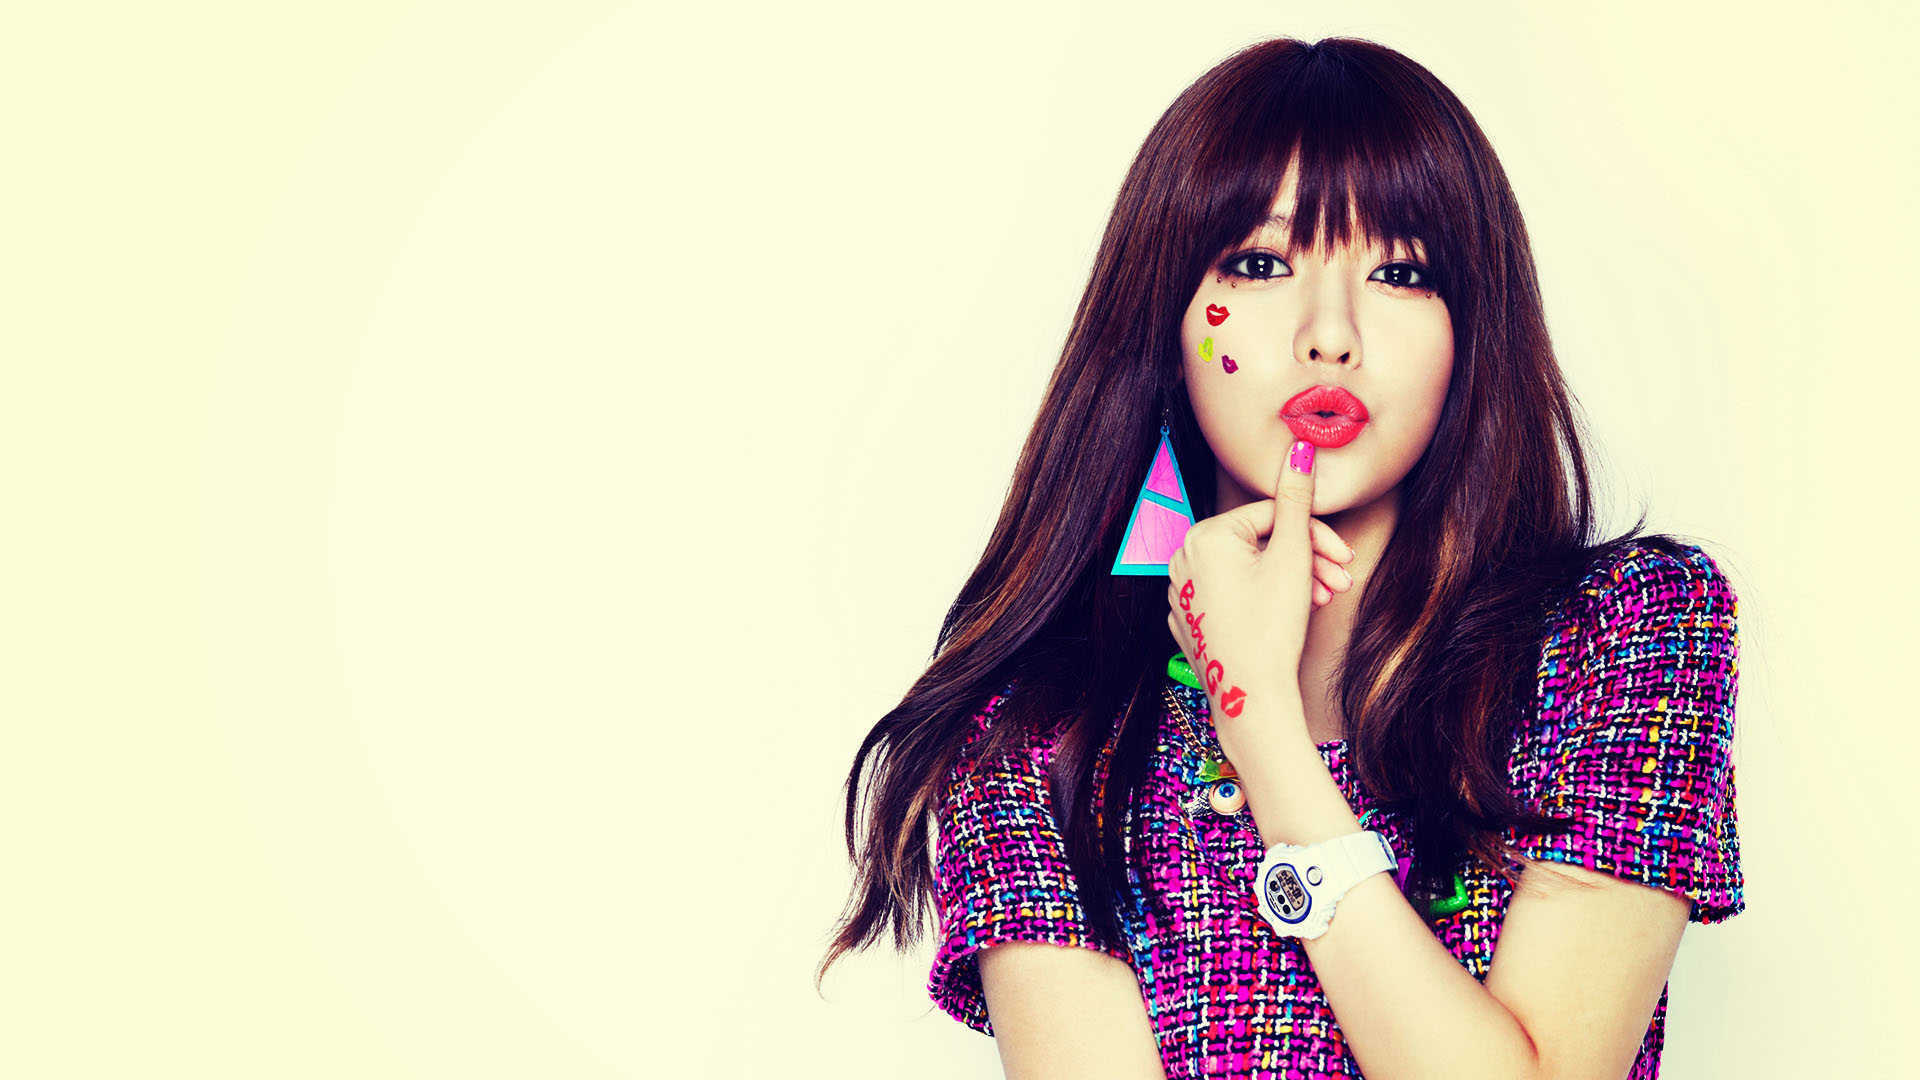 Wallpaper Snsd Sooyoung HD Upload At October By